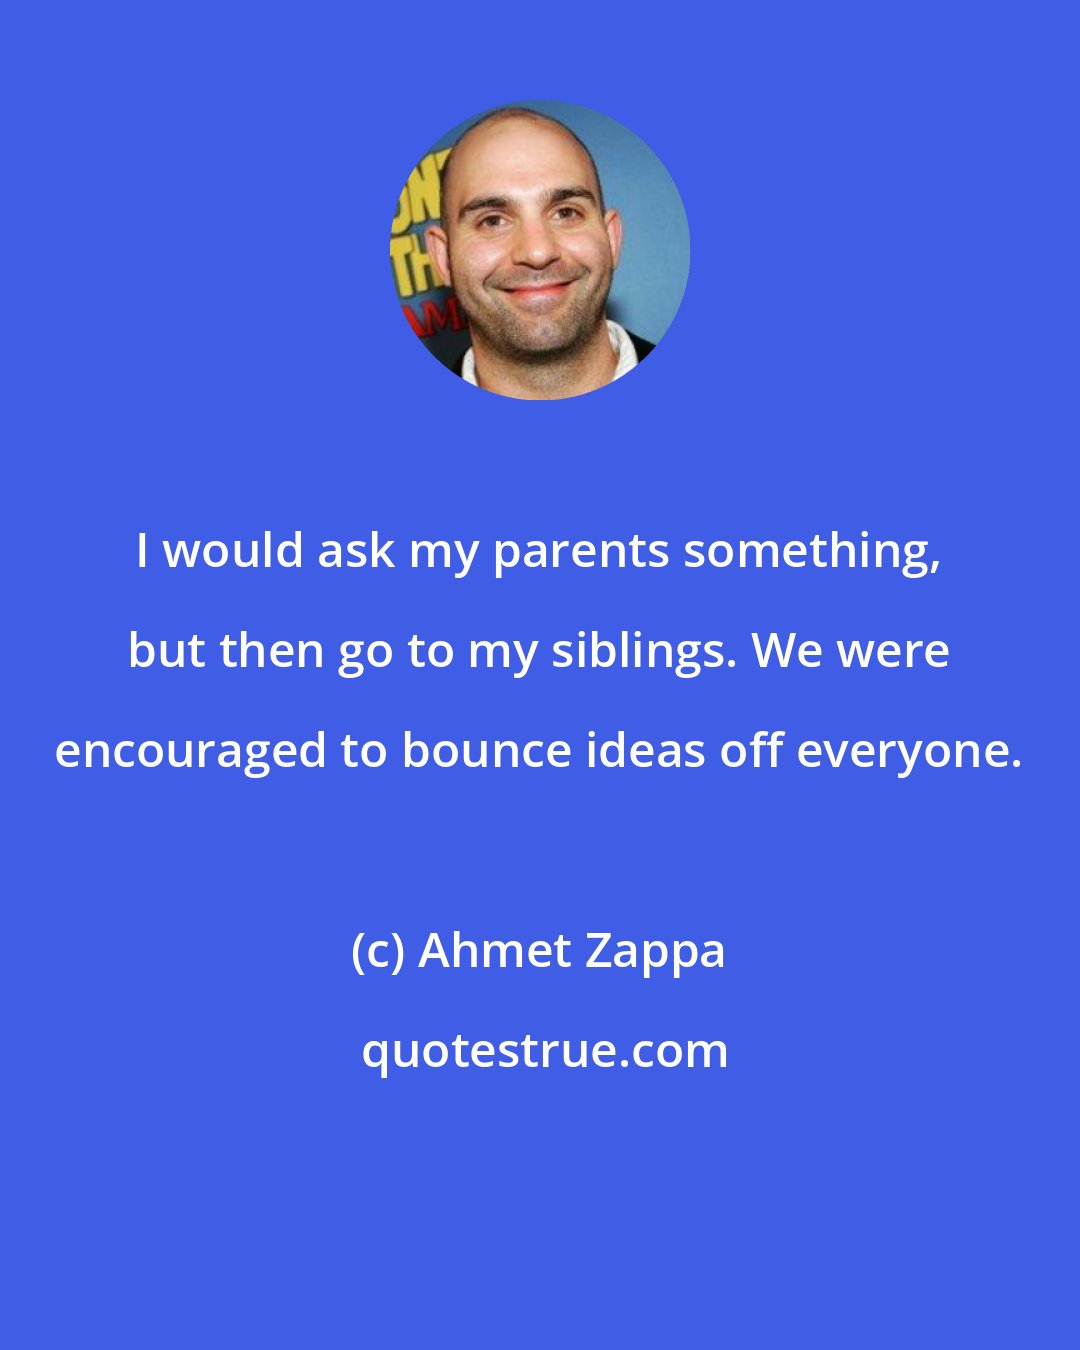 Ahmet Zappa: I would ask my parents something, but then go to my siblings. We were encouraged to bounce ideas off everyone.